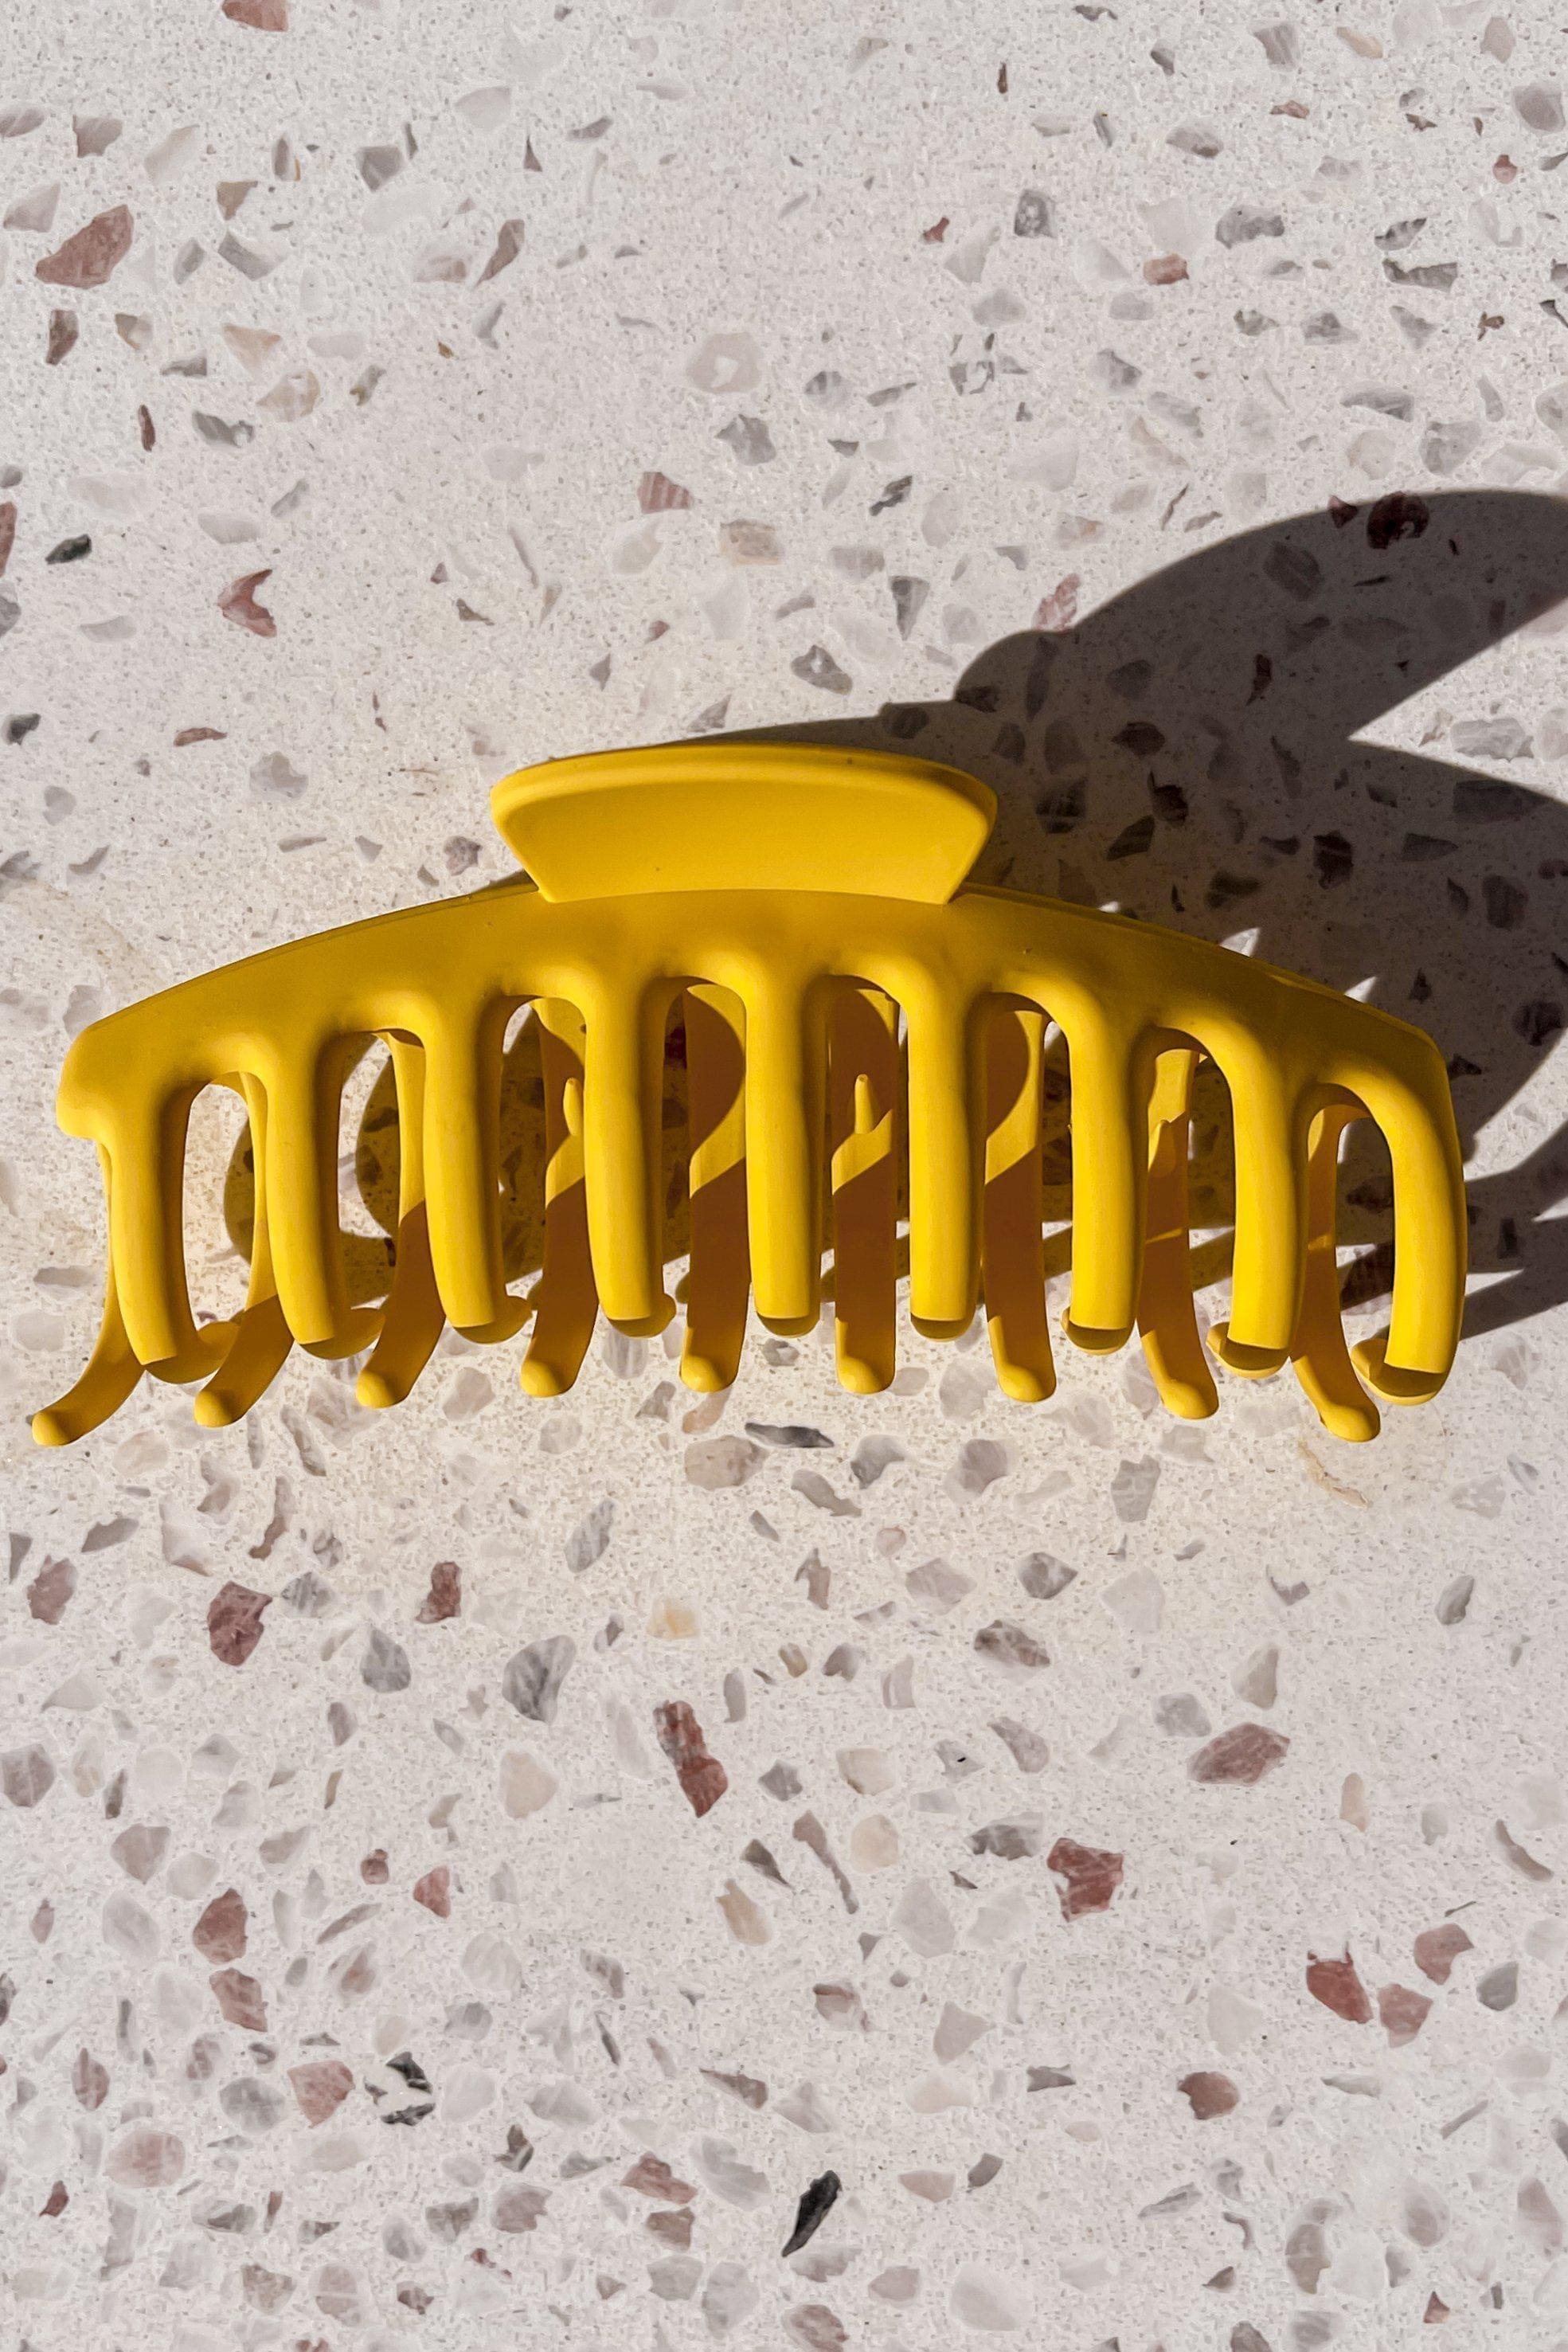 Mallie Hair Clip, ACCESSORIES, HAIR CLIPS, NEW ARRIVALS, YELLOW, Our New Mallie Hair Clip Is Now Only $18.00 Exclusive At Mishkah, We Have The Latest Fashion Accessories @ Mishkah Online Fashion Boutique Our New Mallie Hair Clip is now only $18.00-MISHKAH